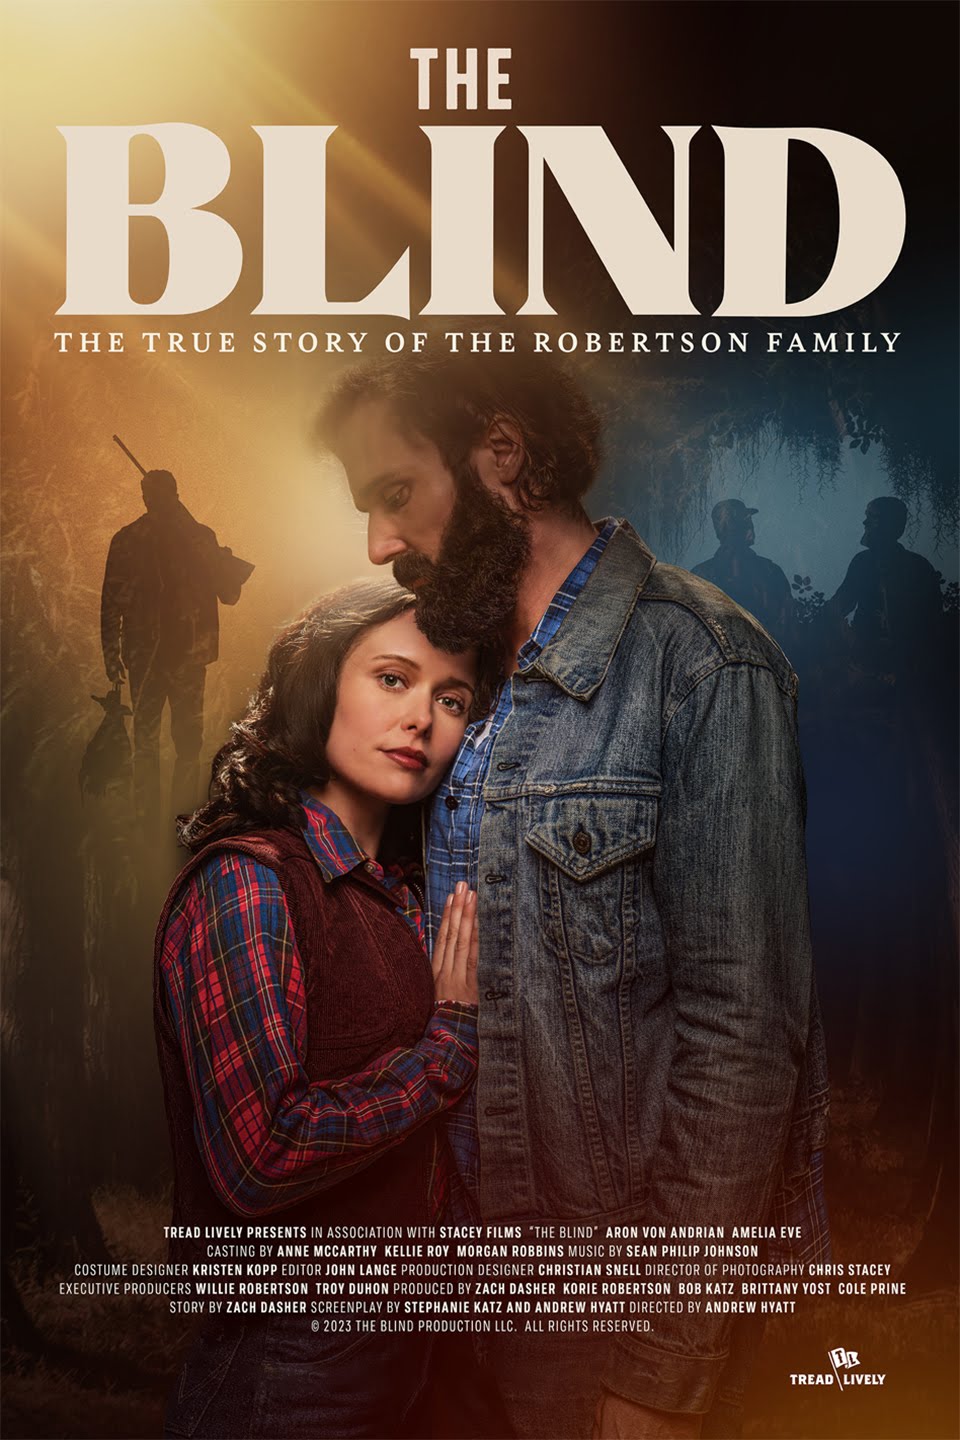 In 1960s Louisiana, future "Duck Dynasty" star Phil Robertson falls in love and starts a family, but his demons soon threaten to tear everyone apart. As he seeks to conquer the shame of his past, he ultimately finds redemption in an unlikely place.